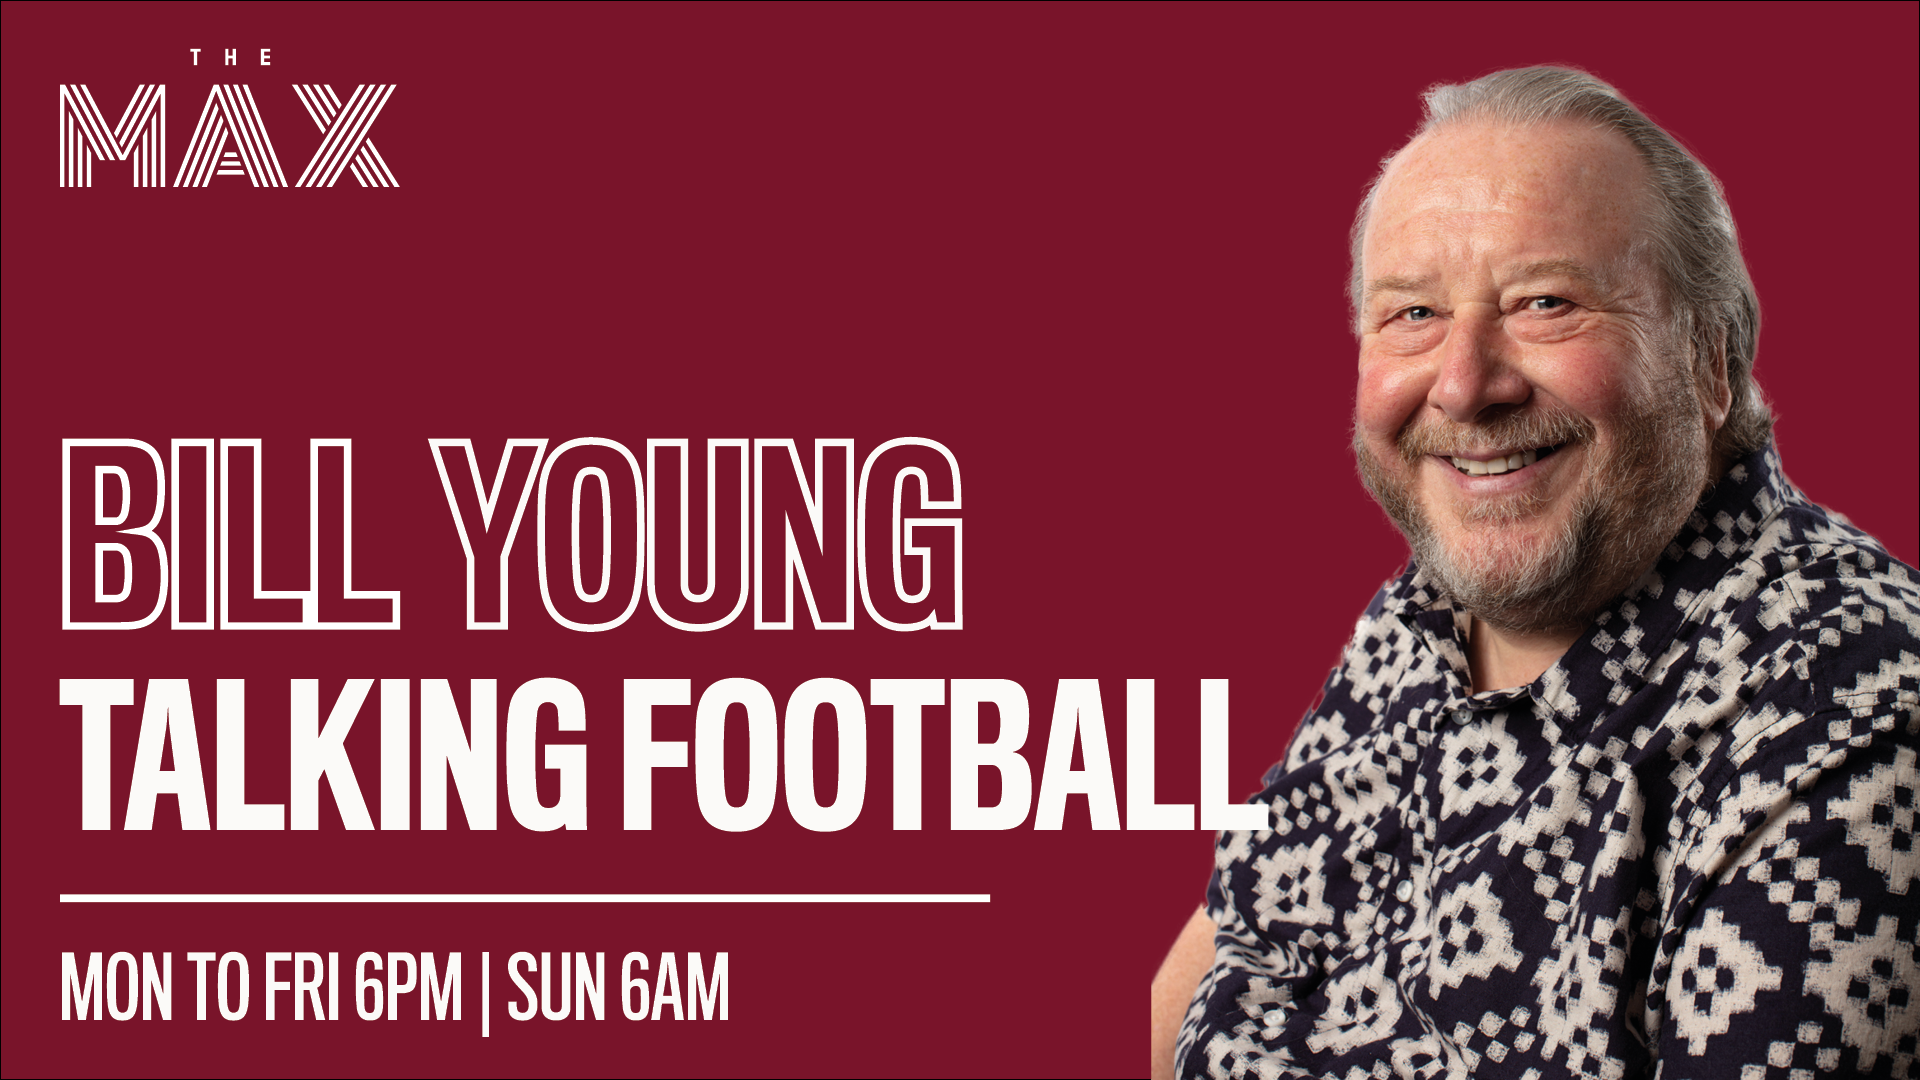 Talking Football with Bill Young - Friday 16th April